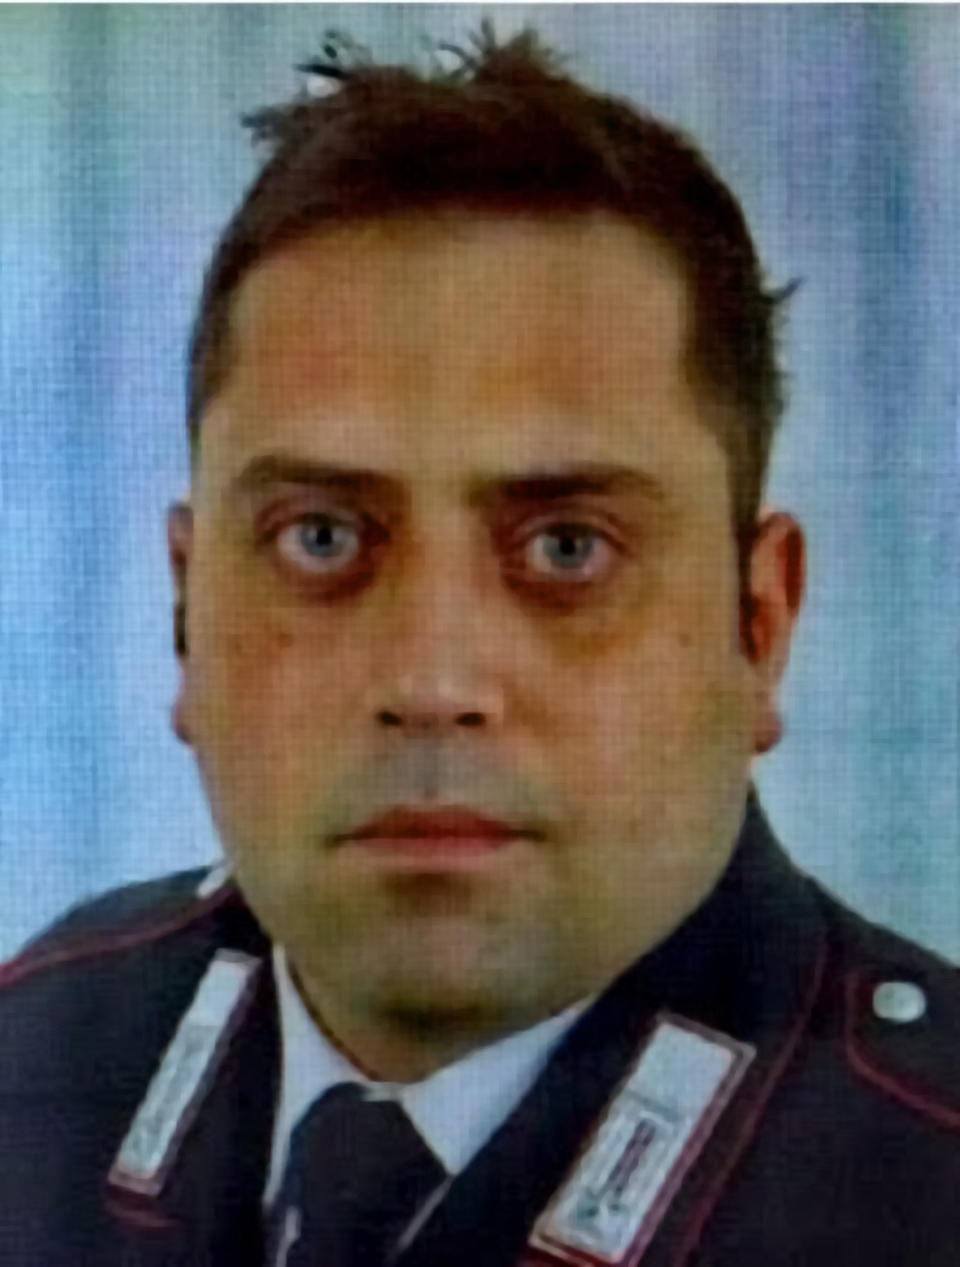 In this photo released by Carabinieri, is portrayed officer Mario Cerciello Rega, 35, who was stabbed to death in Rome early Friday, July 26, 2019. Italian police said Saturday that two 19-year-old American tourists have confessed to fatally stabbing the Italian paramilitary policeman who was investigating the theft of a bag with a cellphone.